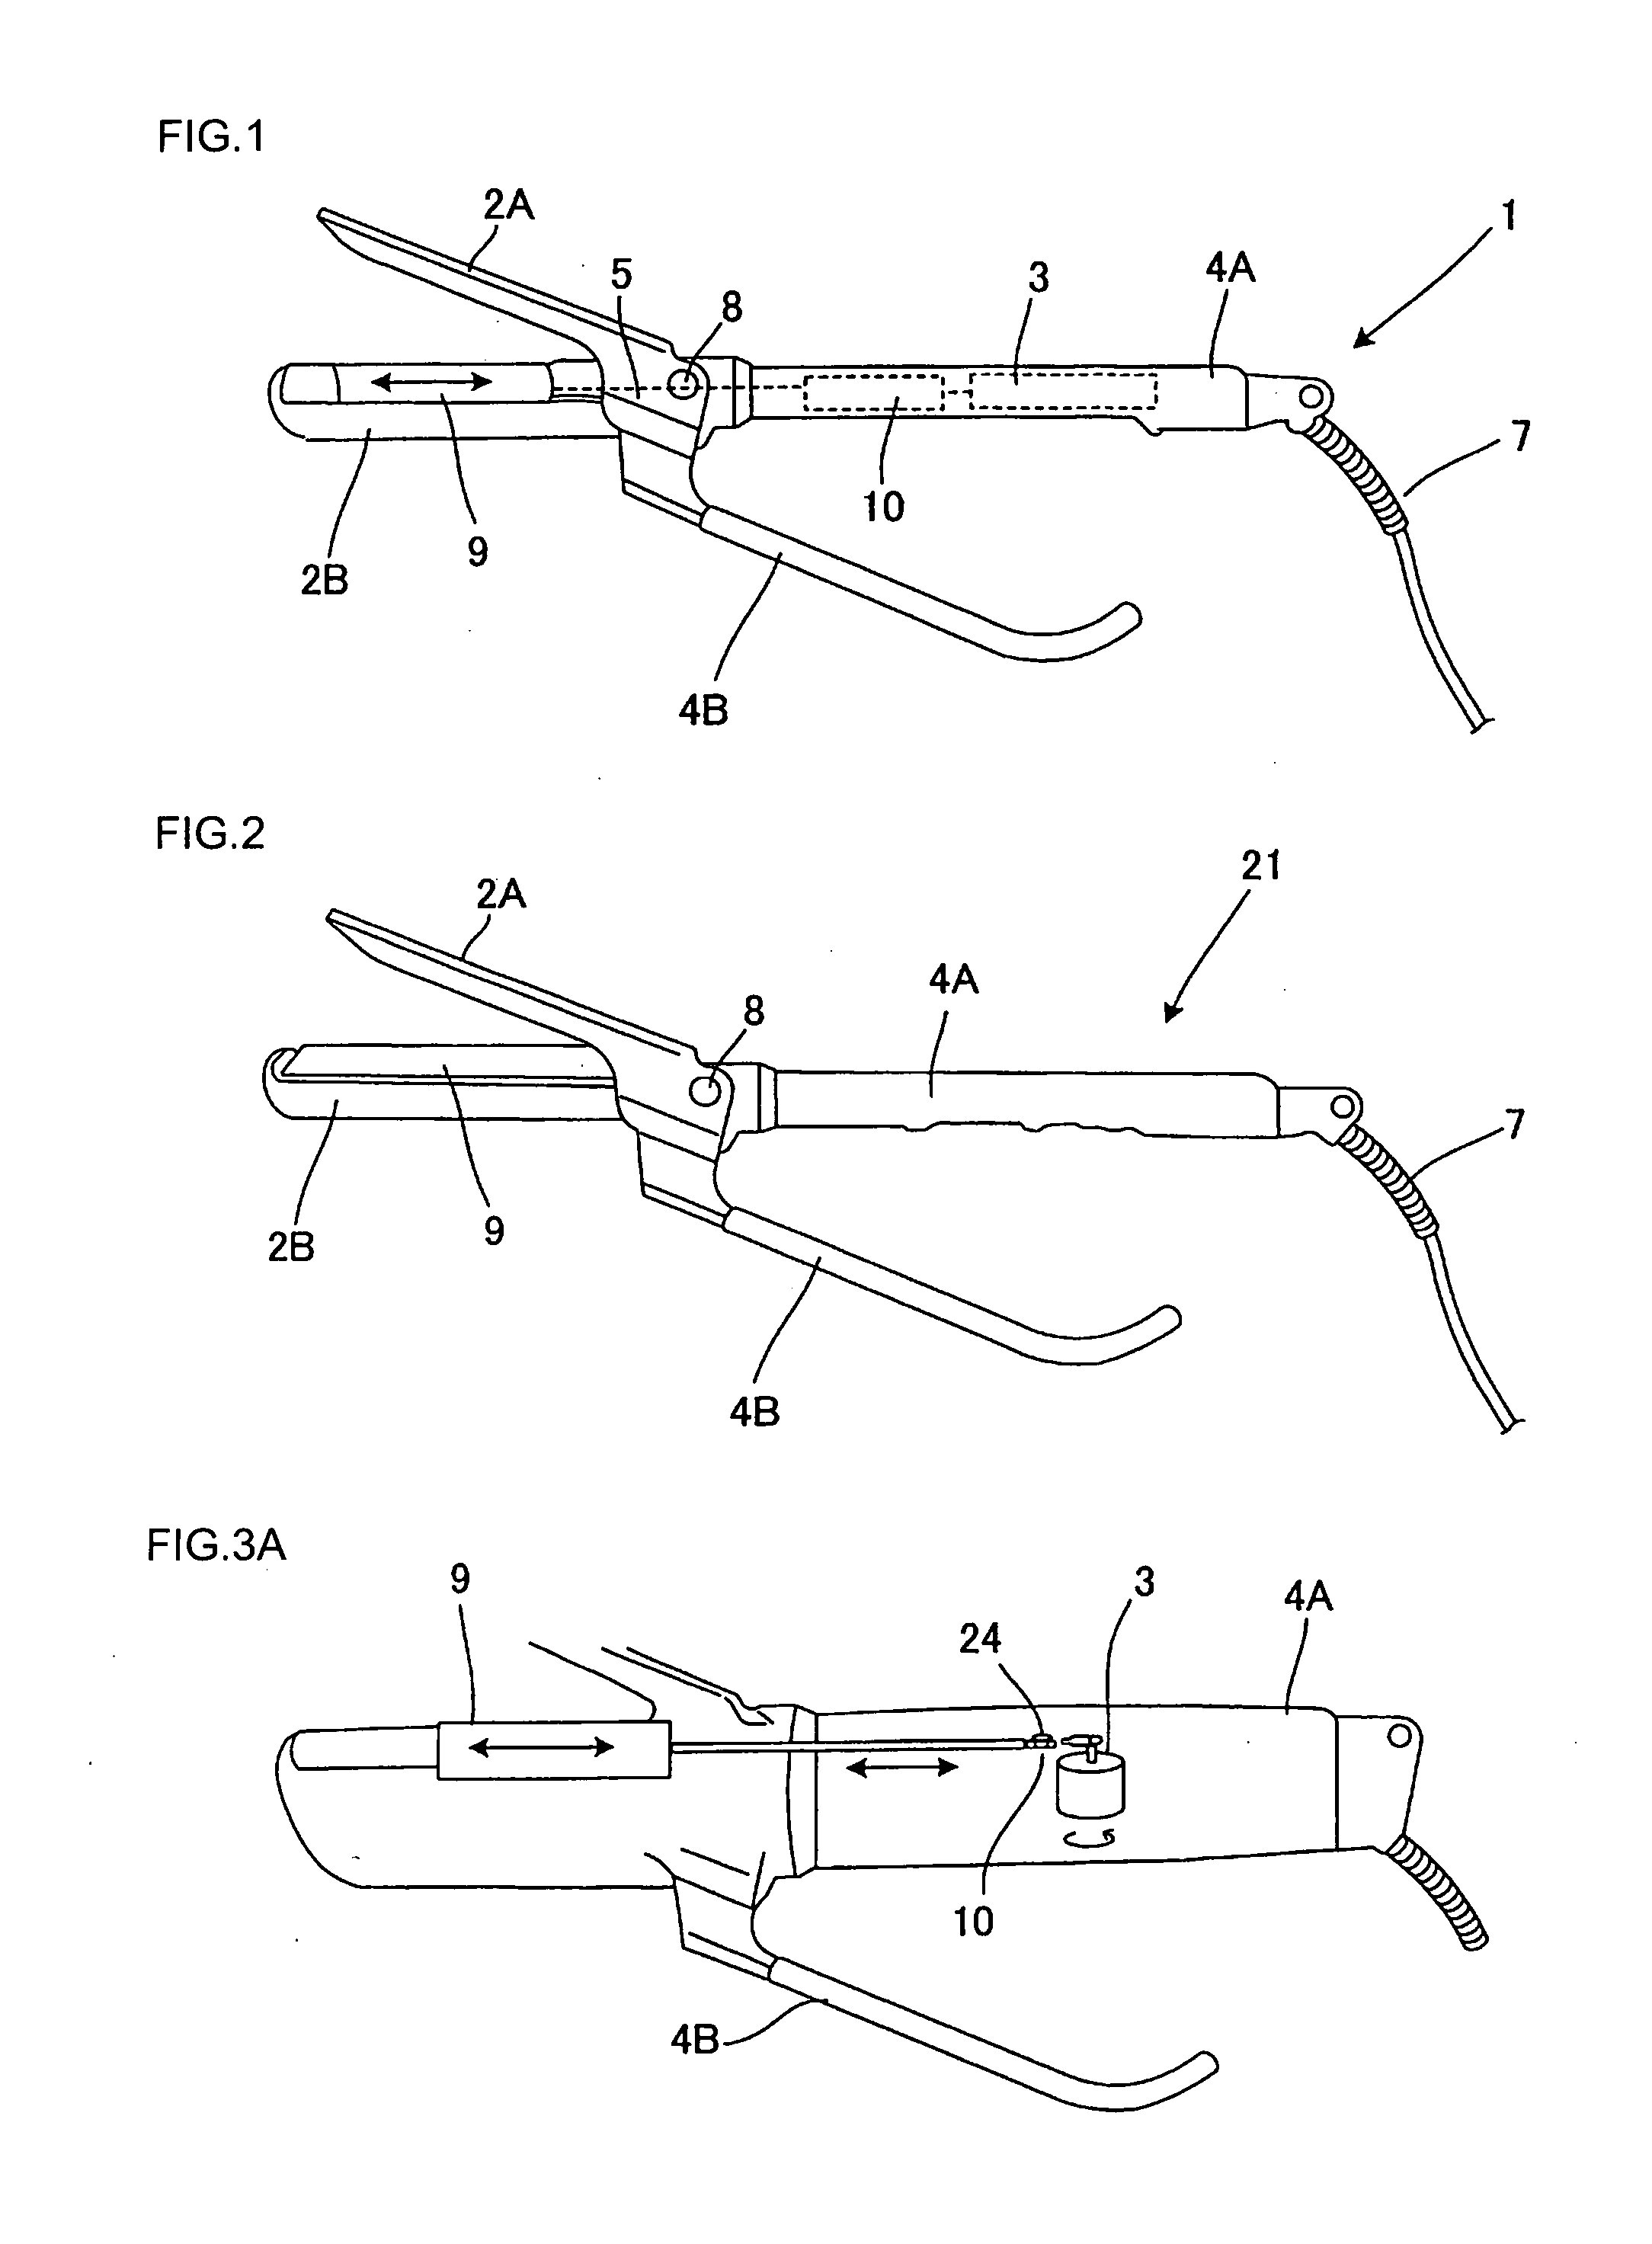 Device and method for styling hair